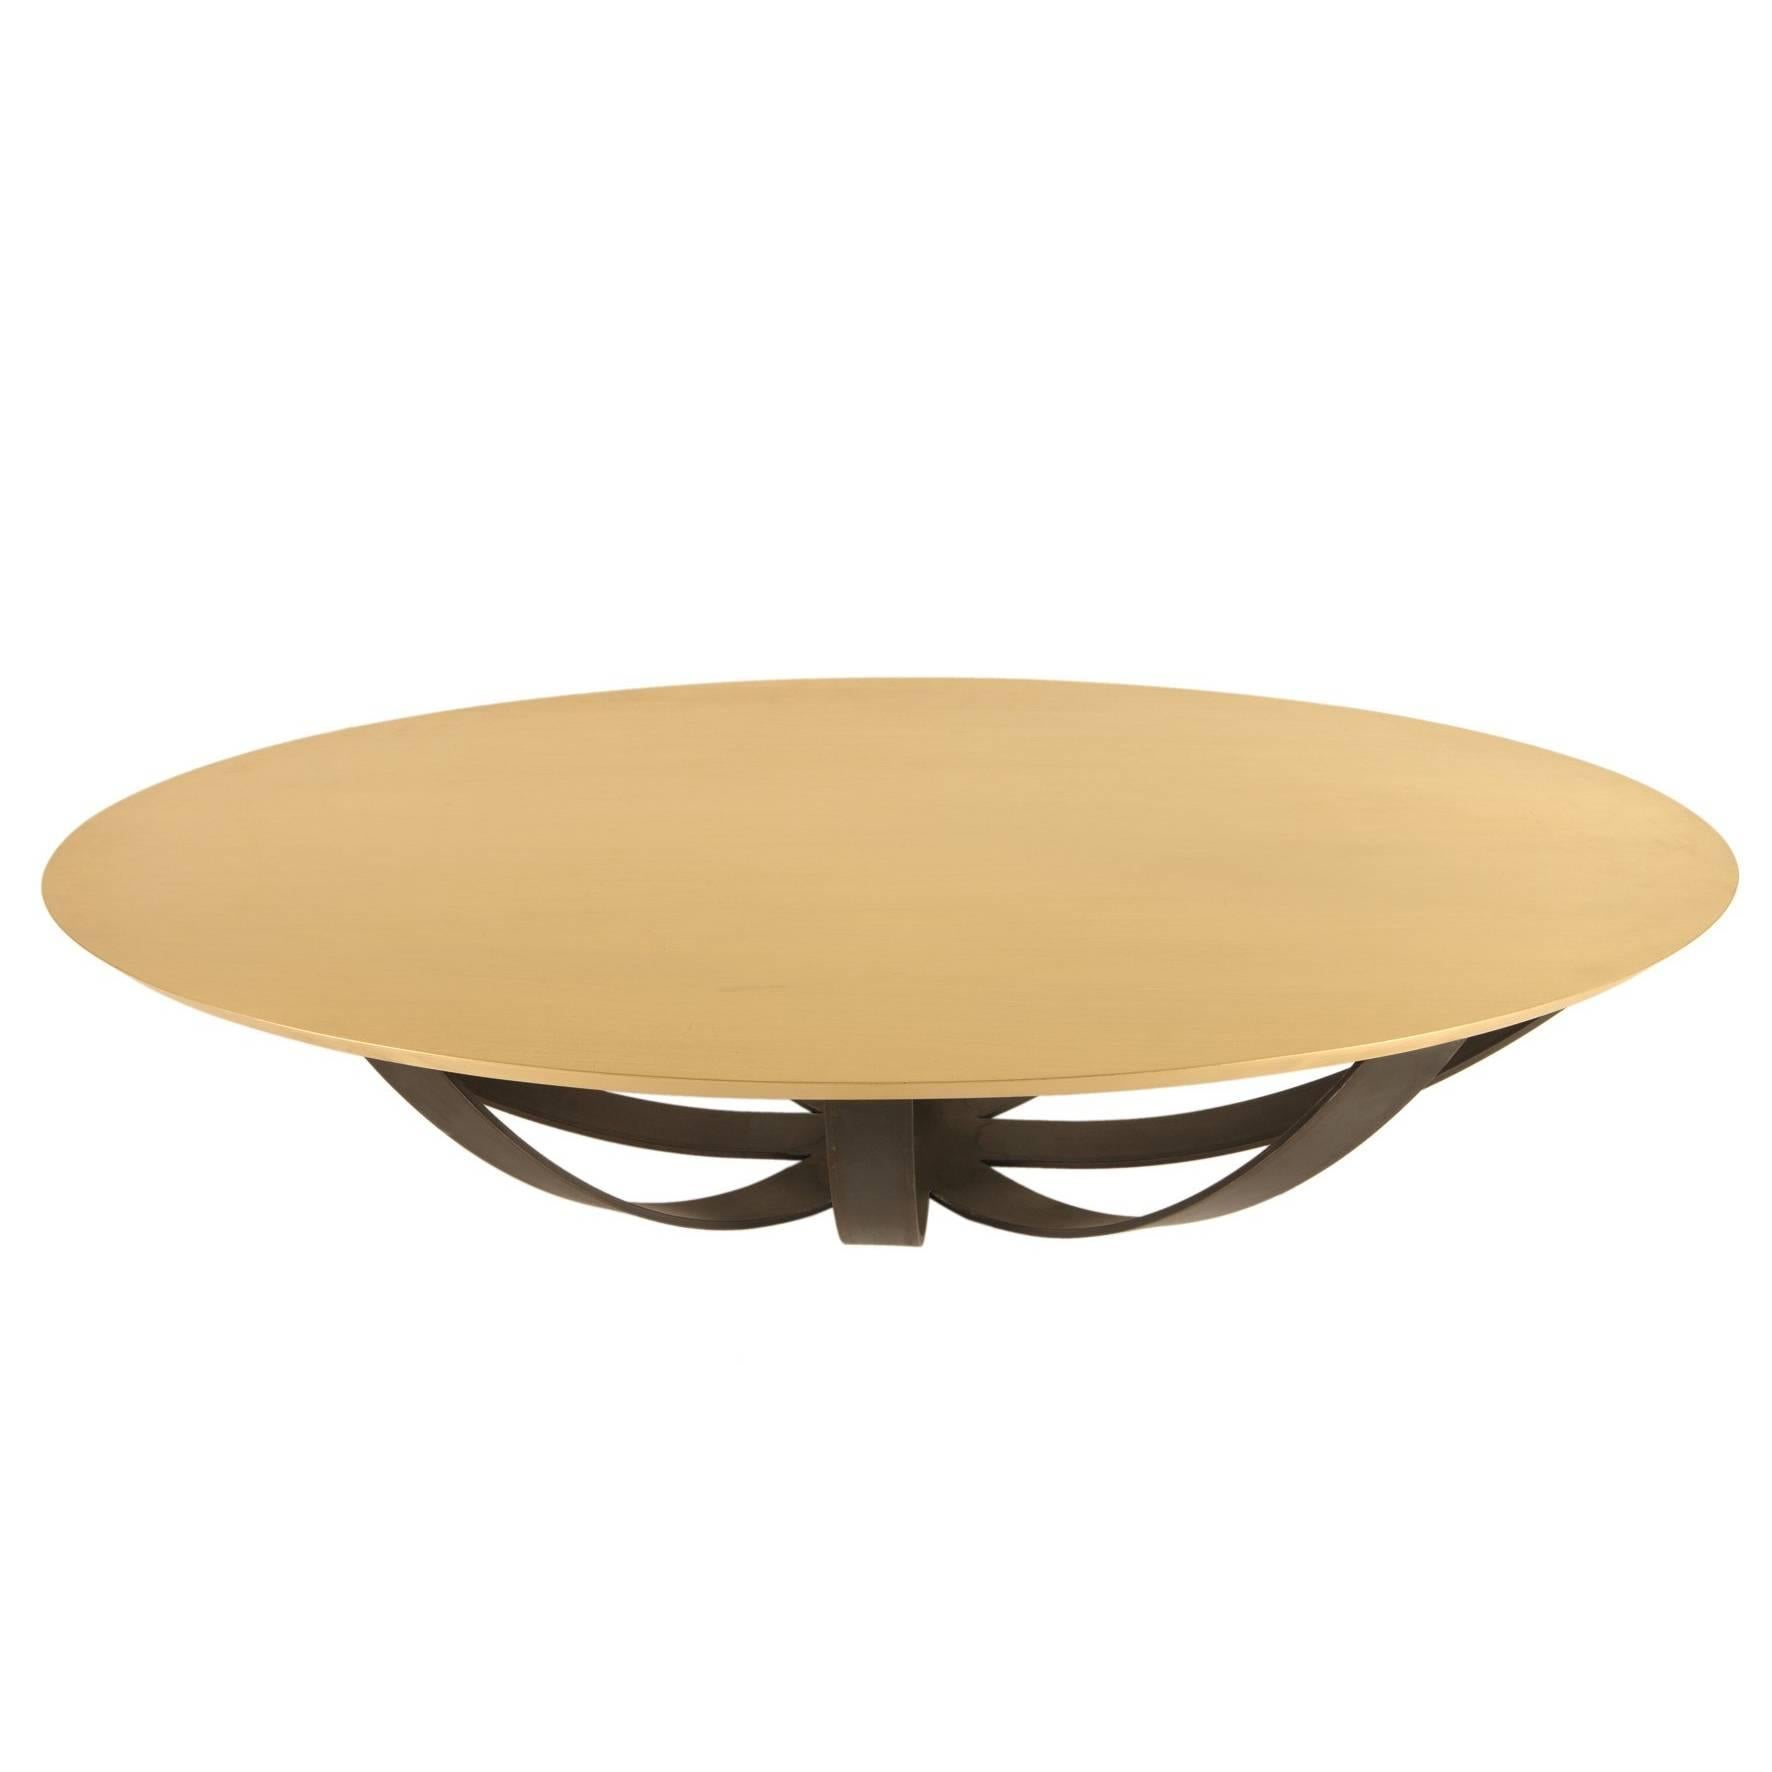 Web Coffee Table with Metal Base and Top in Brass, Contemporary Coffee Table